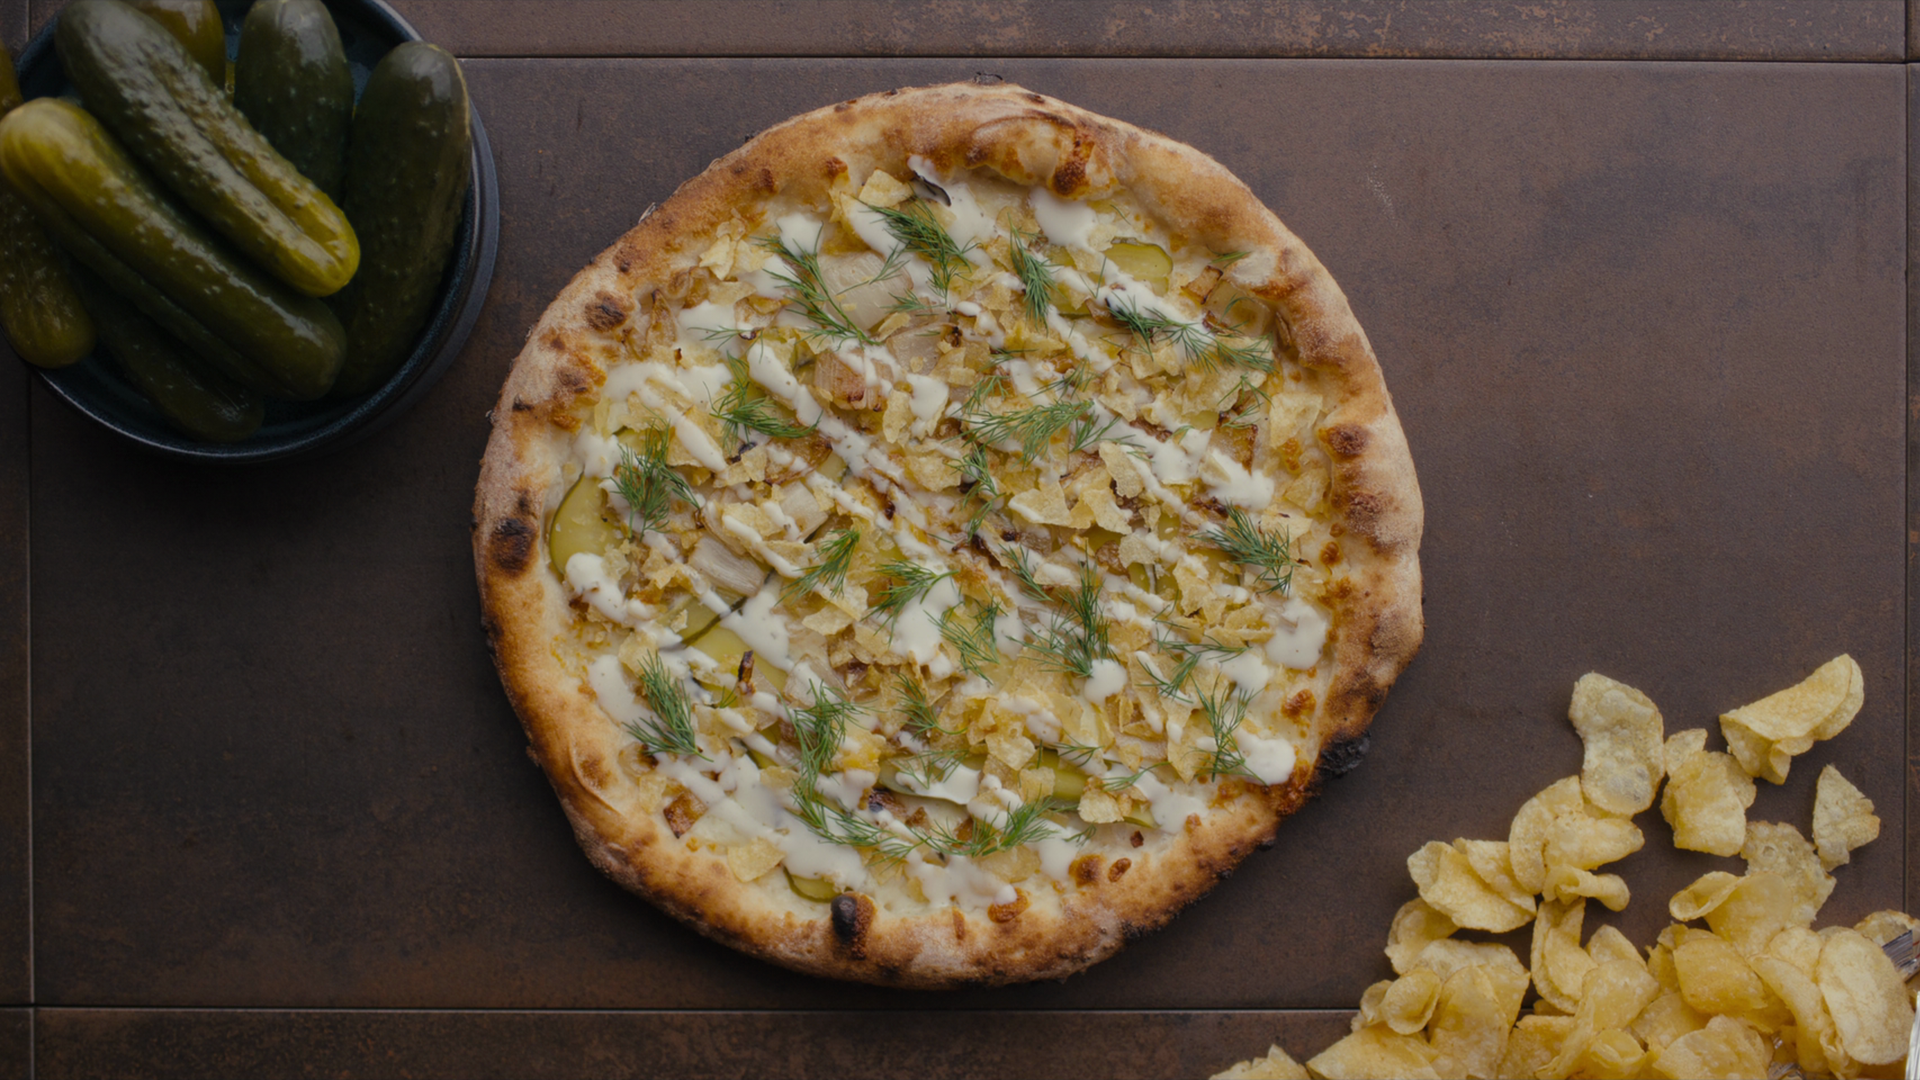 A pickle pizza